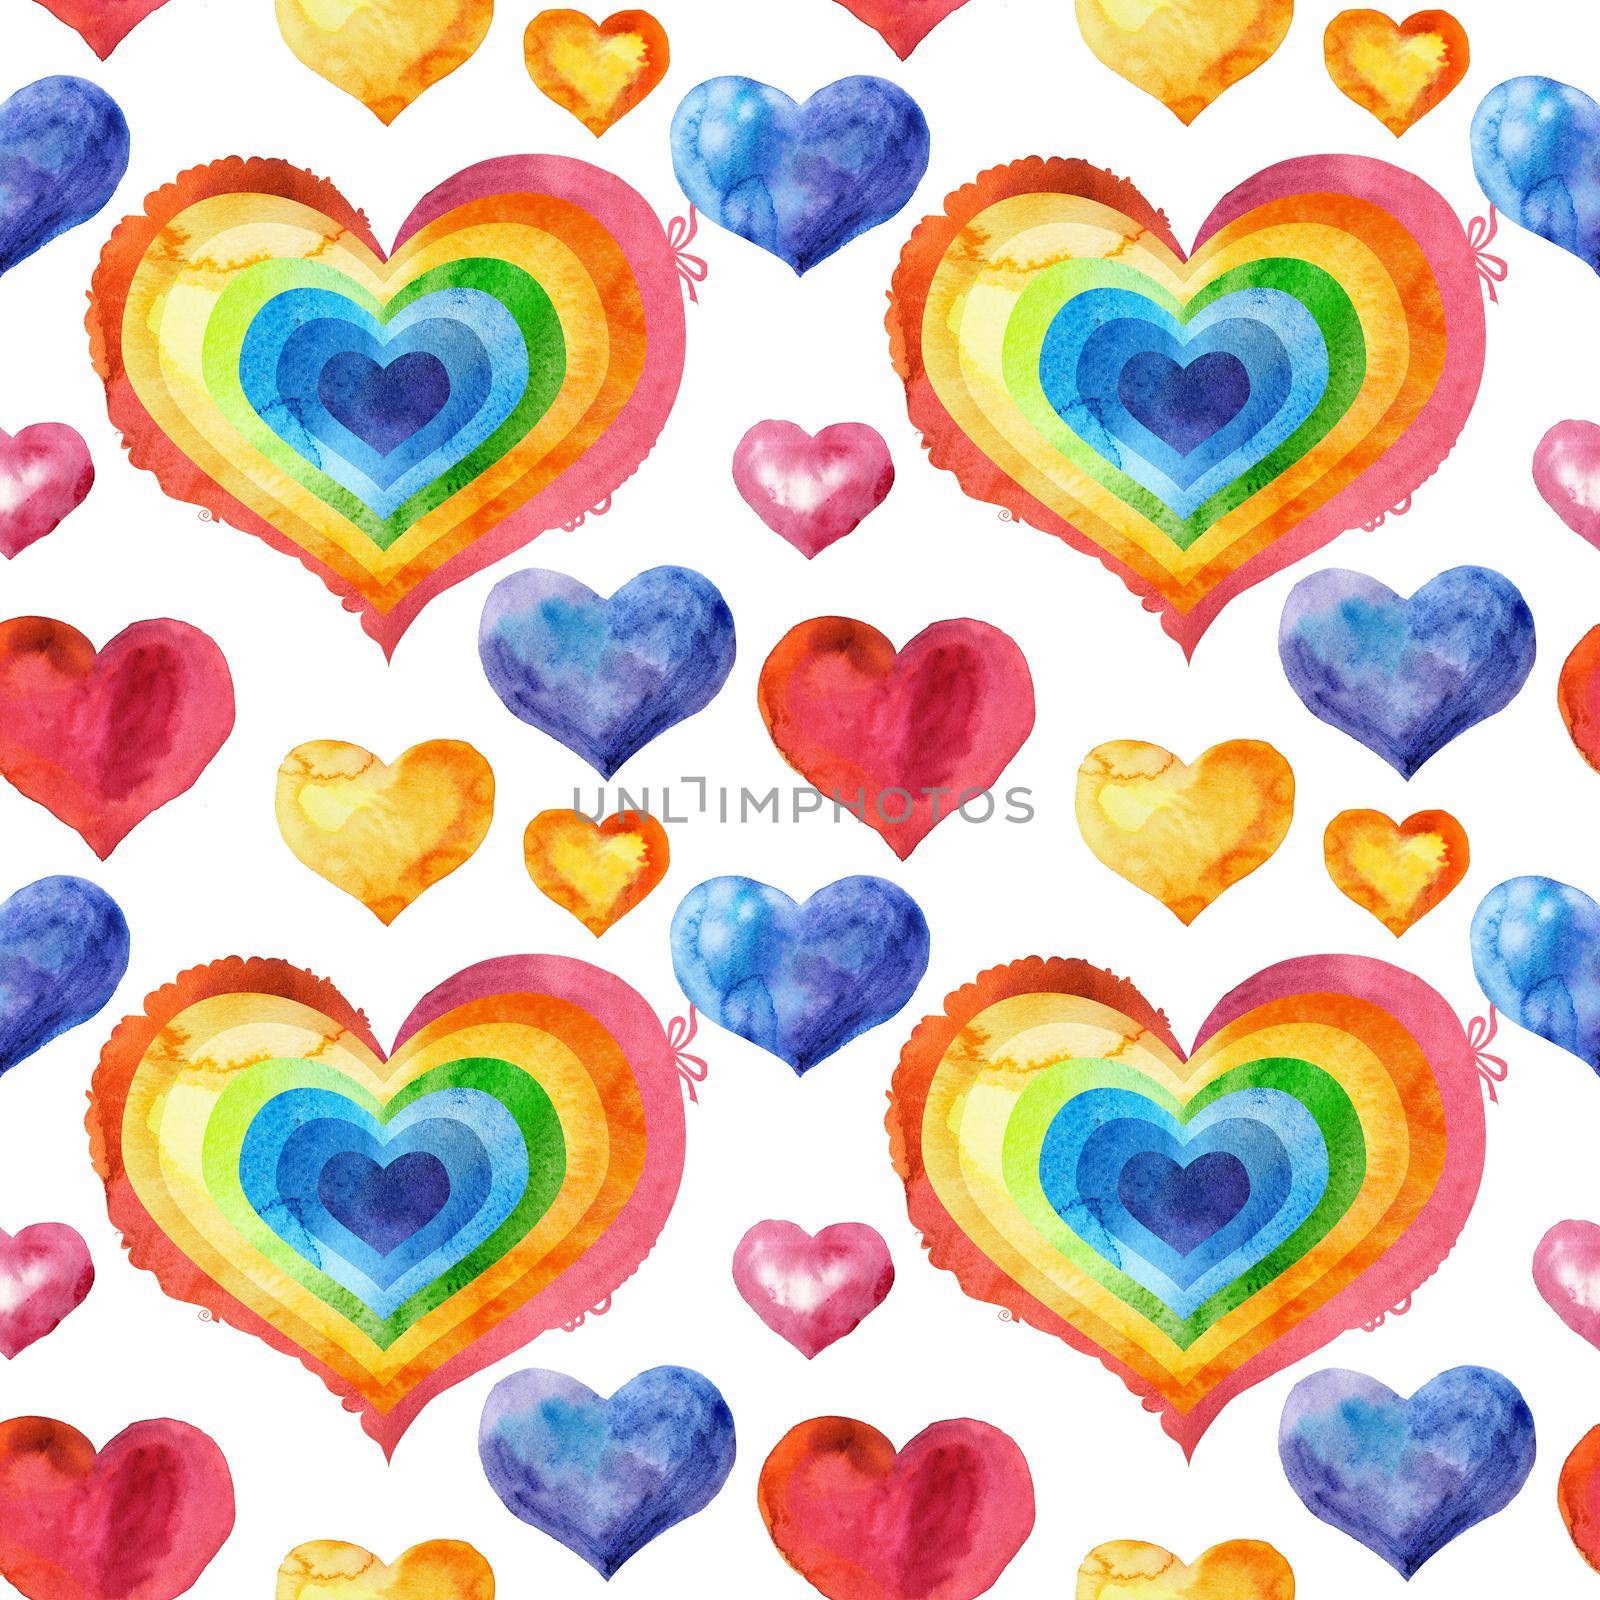 Seamless pattern of watercolor rainbow hearts with light and shade, painted by hand